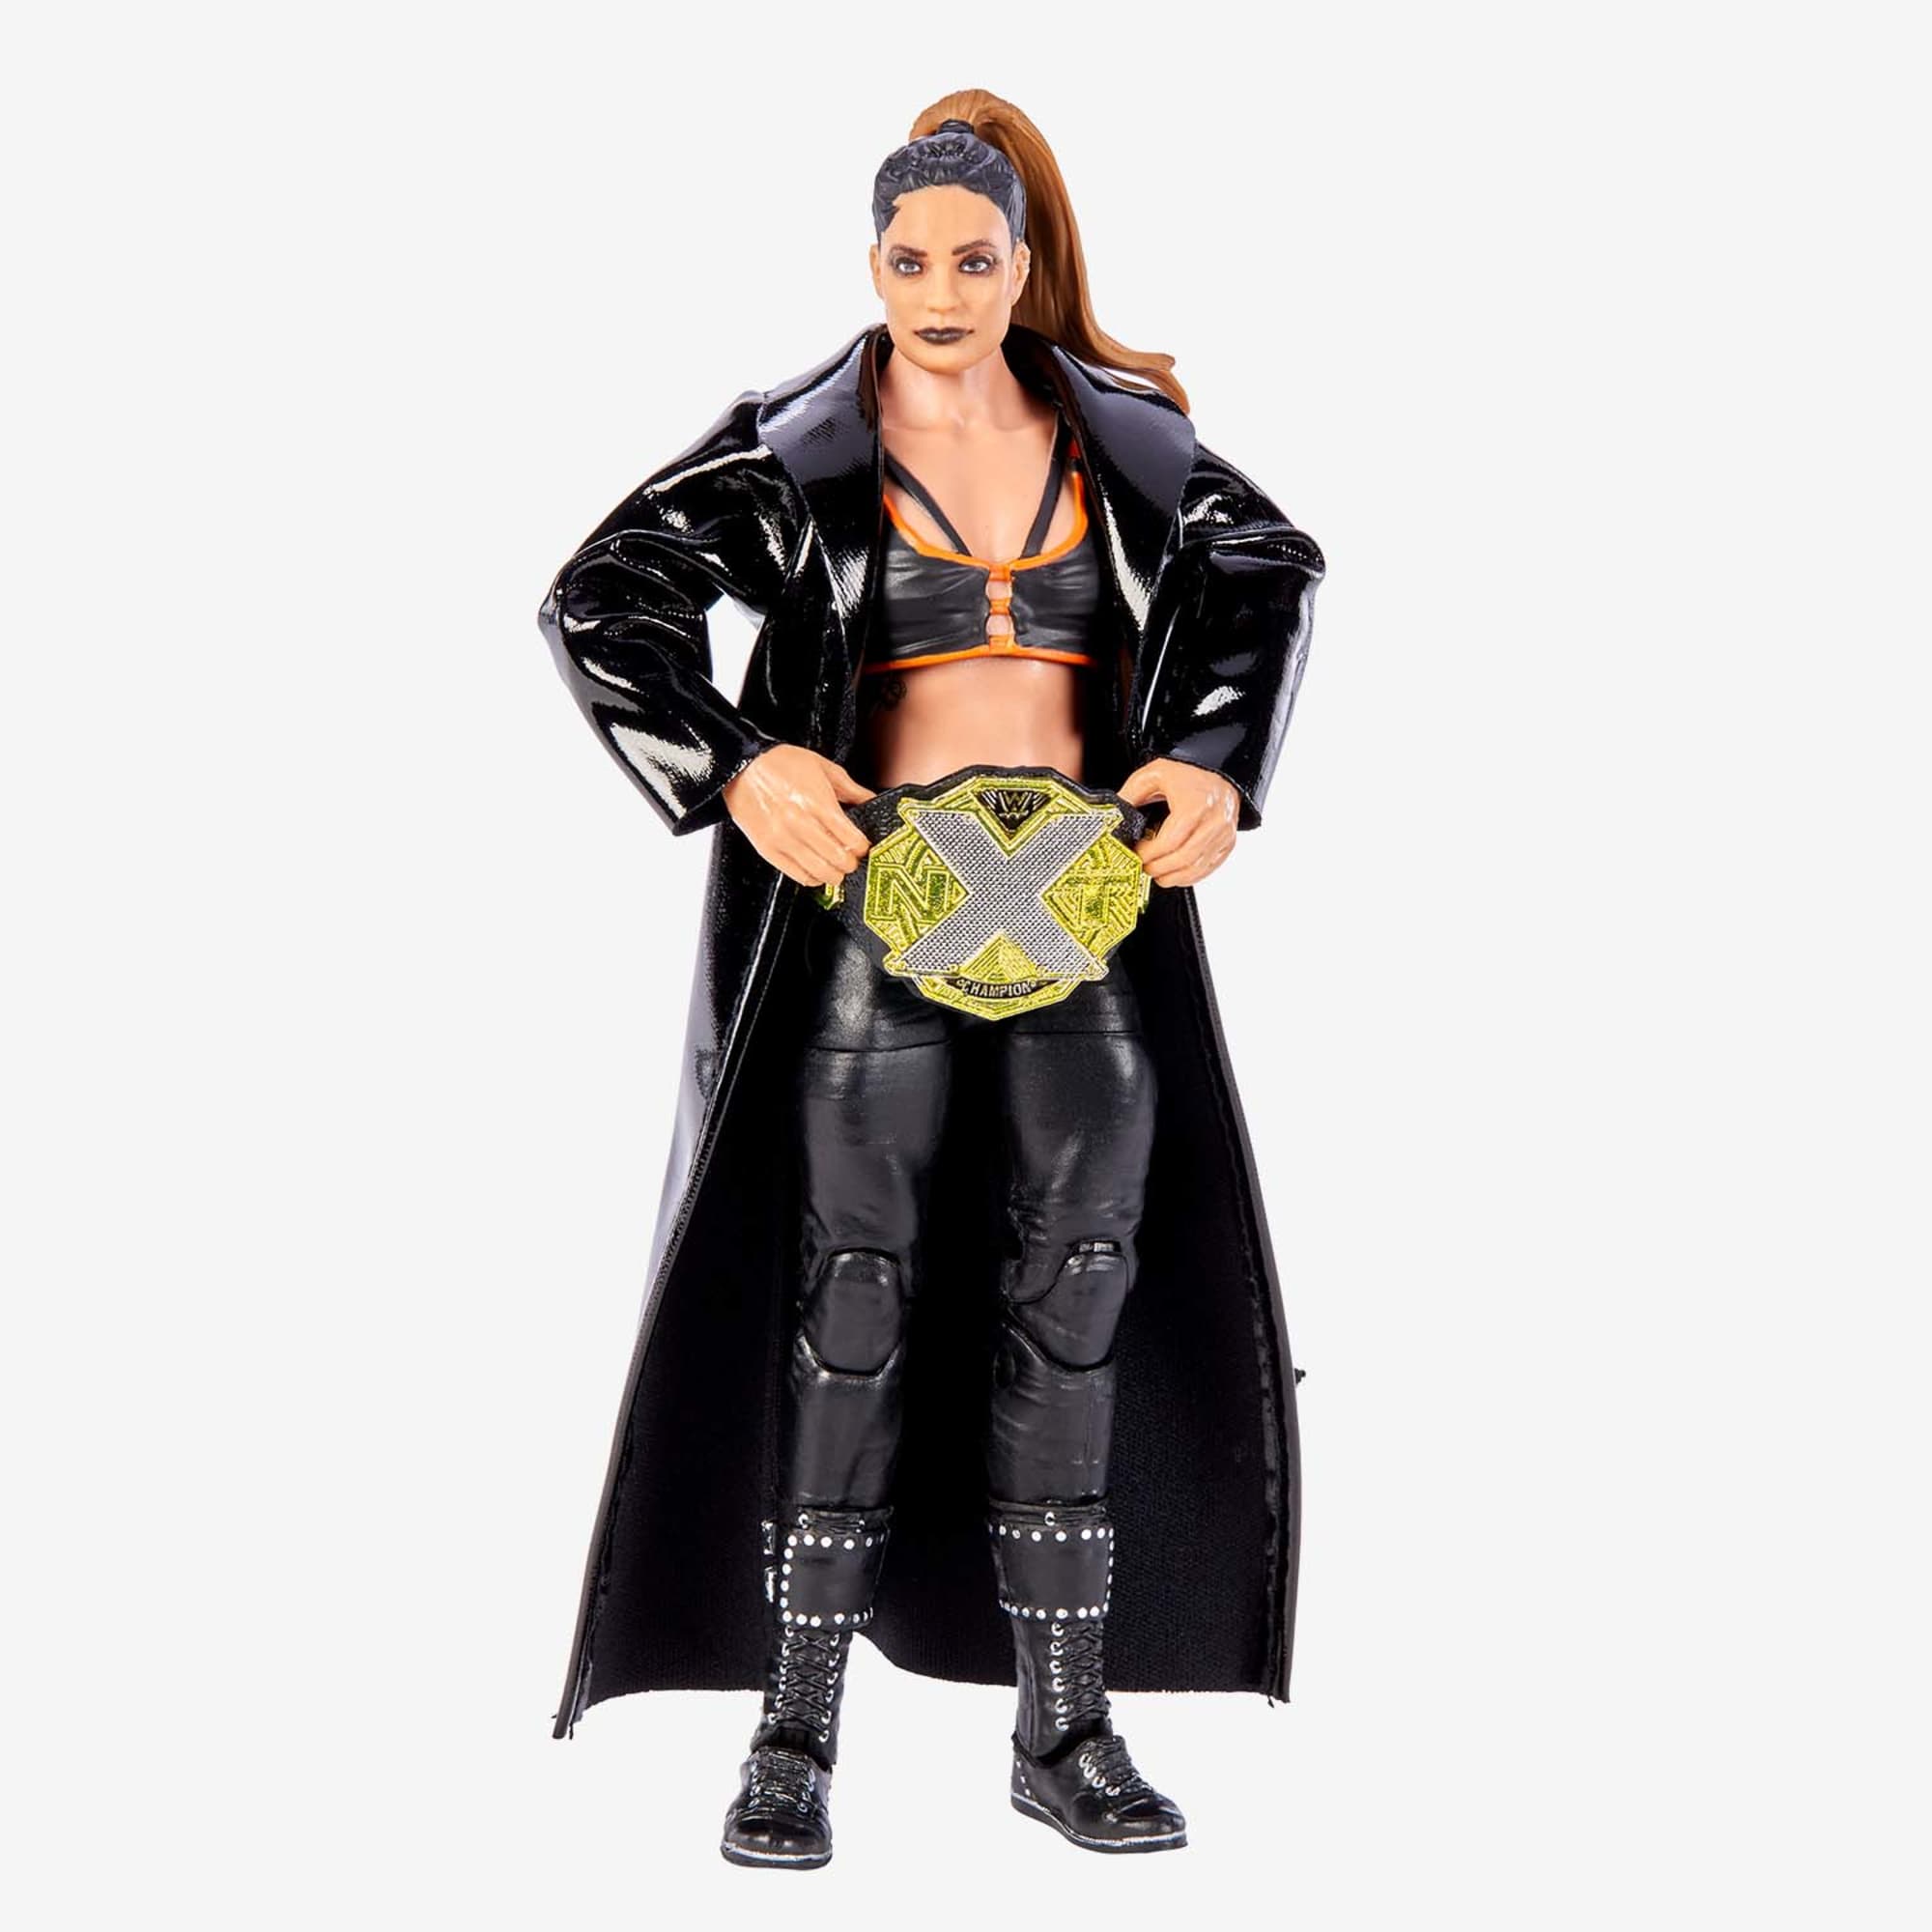 Build Your WWE Action Figure Collection at Wrestling Shop –